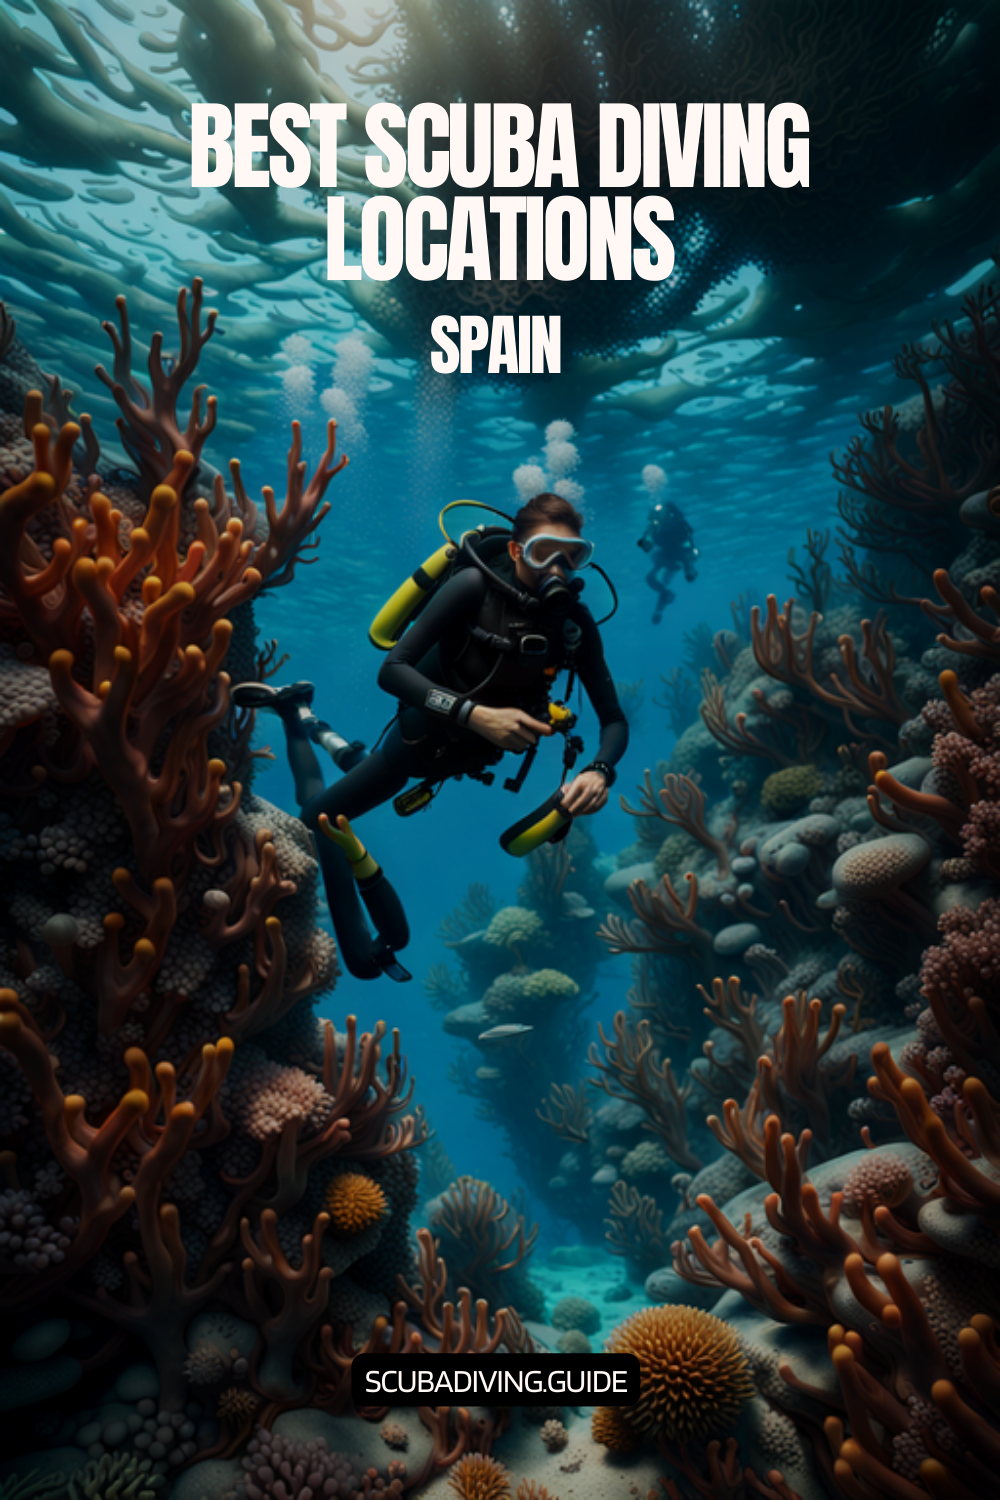 Scuba Diving Locations in Spain